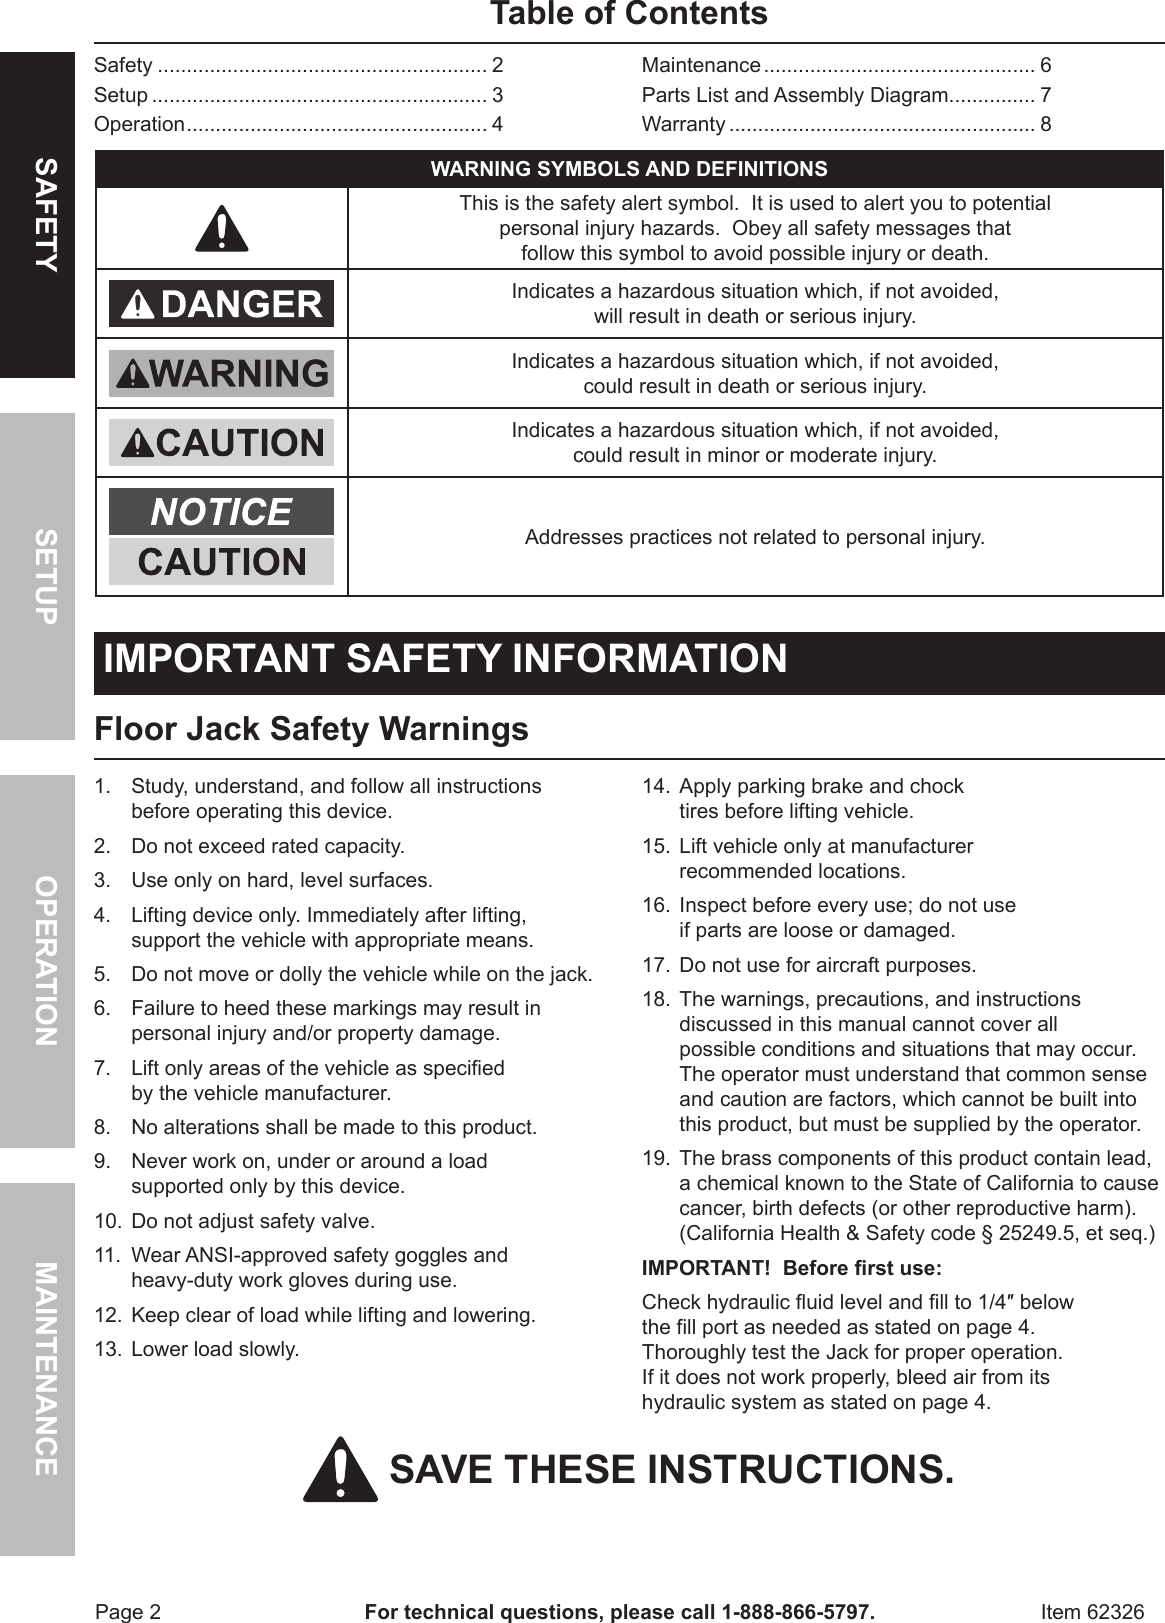 Page 2 of 8 - Manual For The 62326 3 Ton Low Profile Steel Heavy Duty Floor Jack With Rapid Pump®